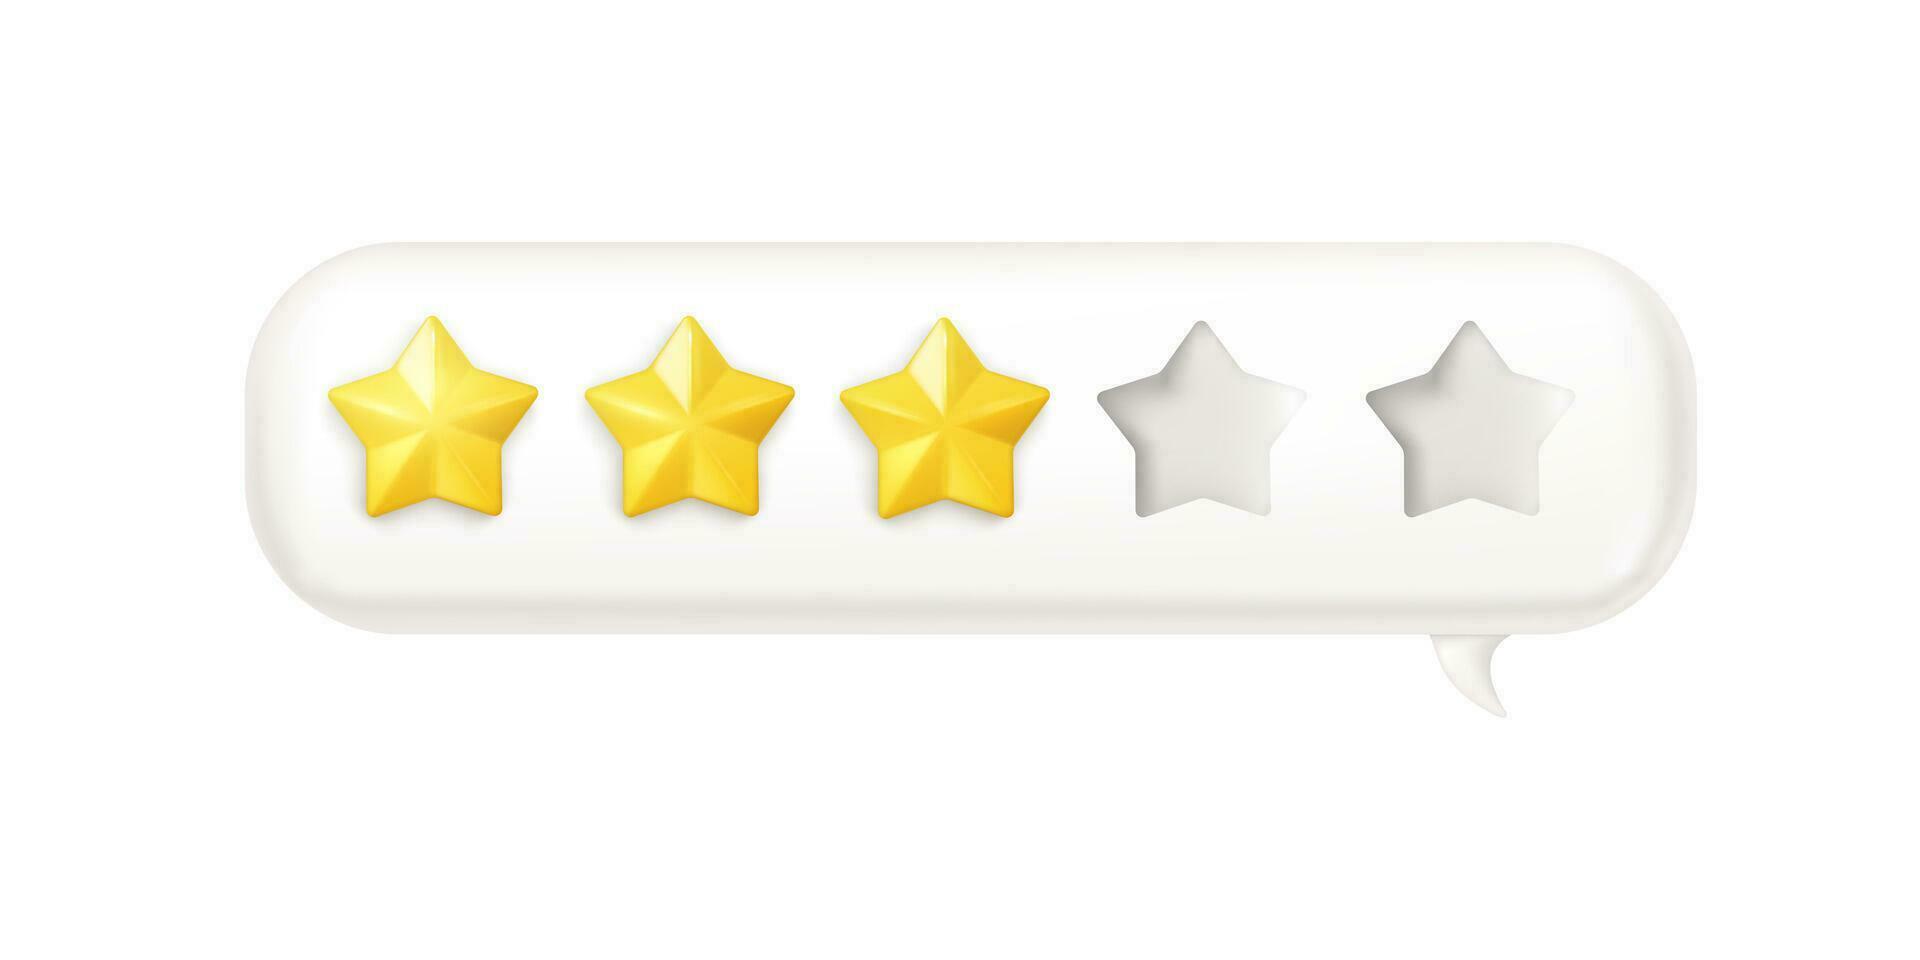 Colorful 3D bubble display a 3-star rating out of 5, indicating the level of quality and service based on customer and employee reviews. vector